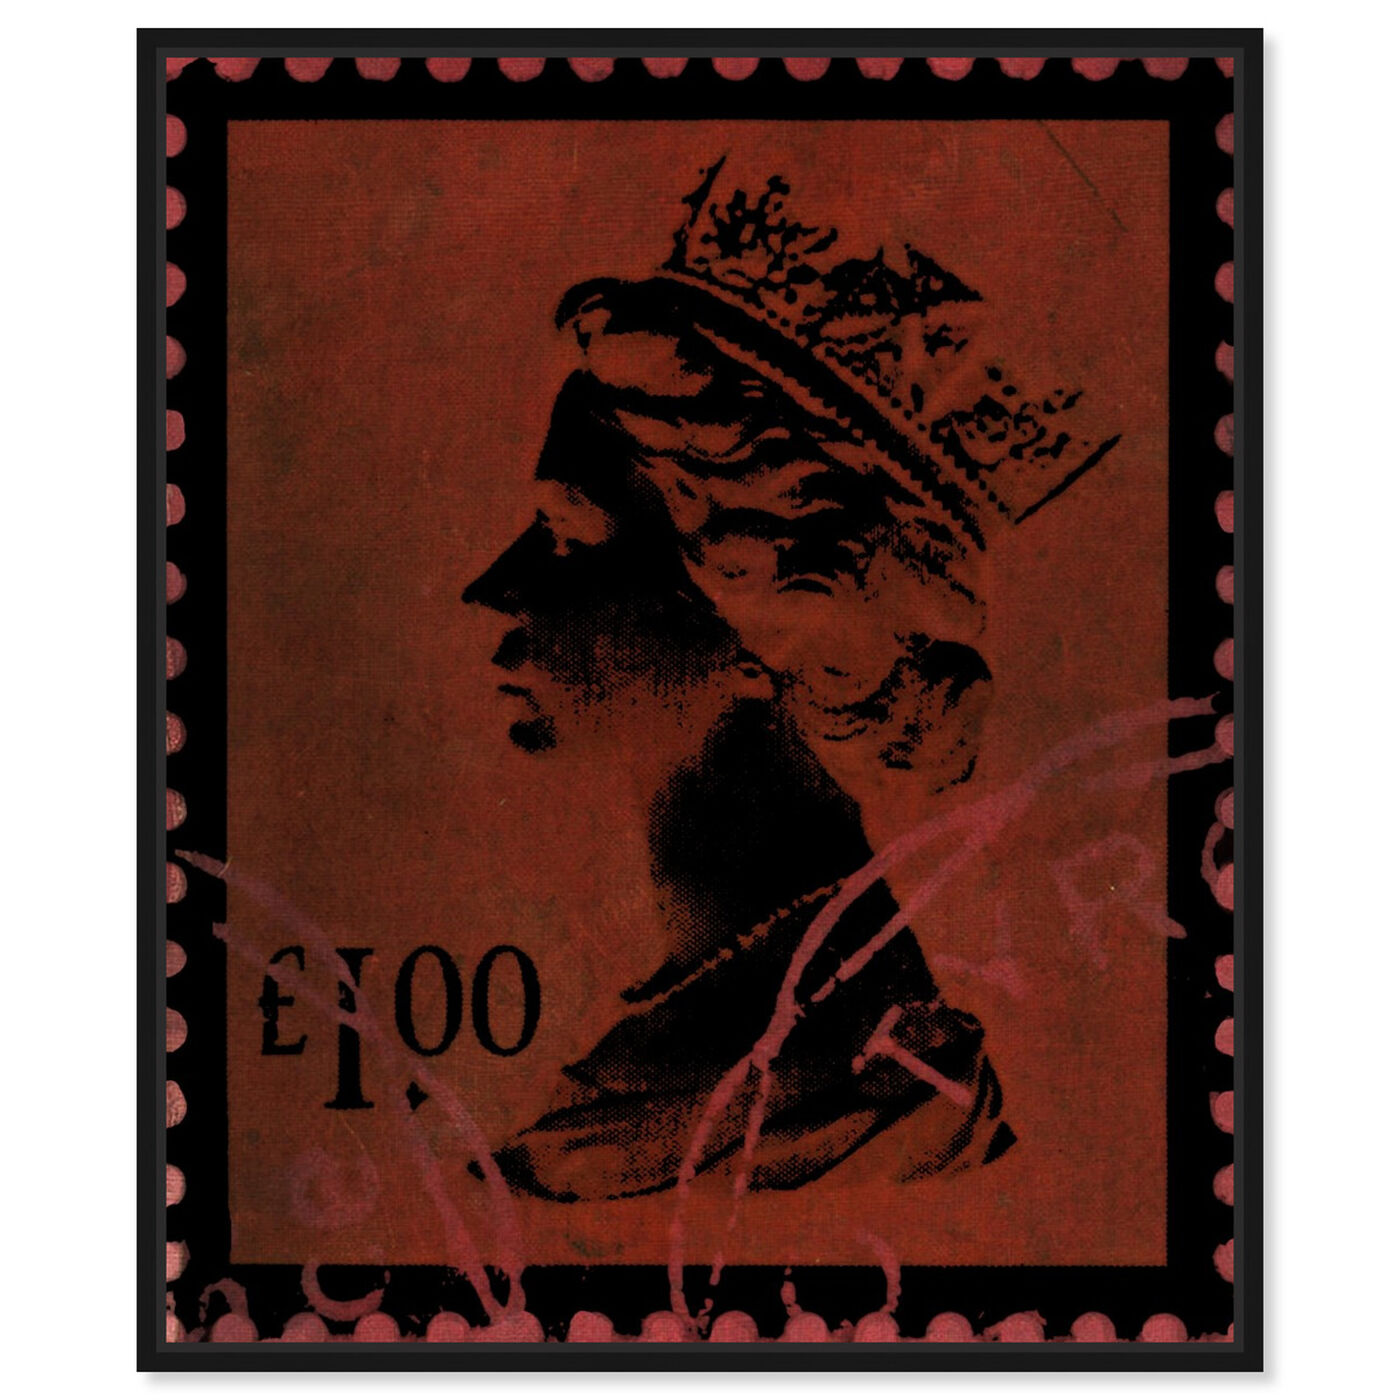 Front view of Save The Queen Three featuring advertising and posters art.